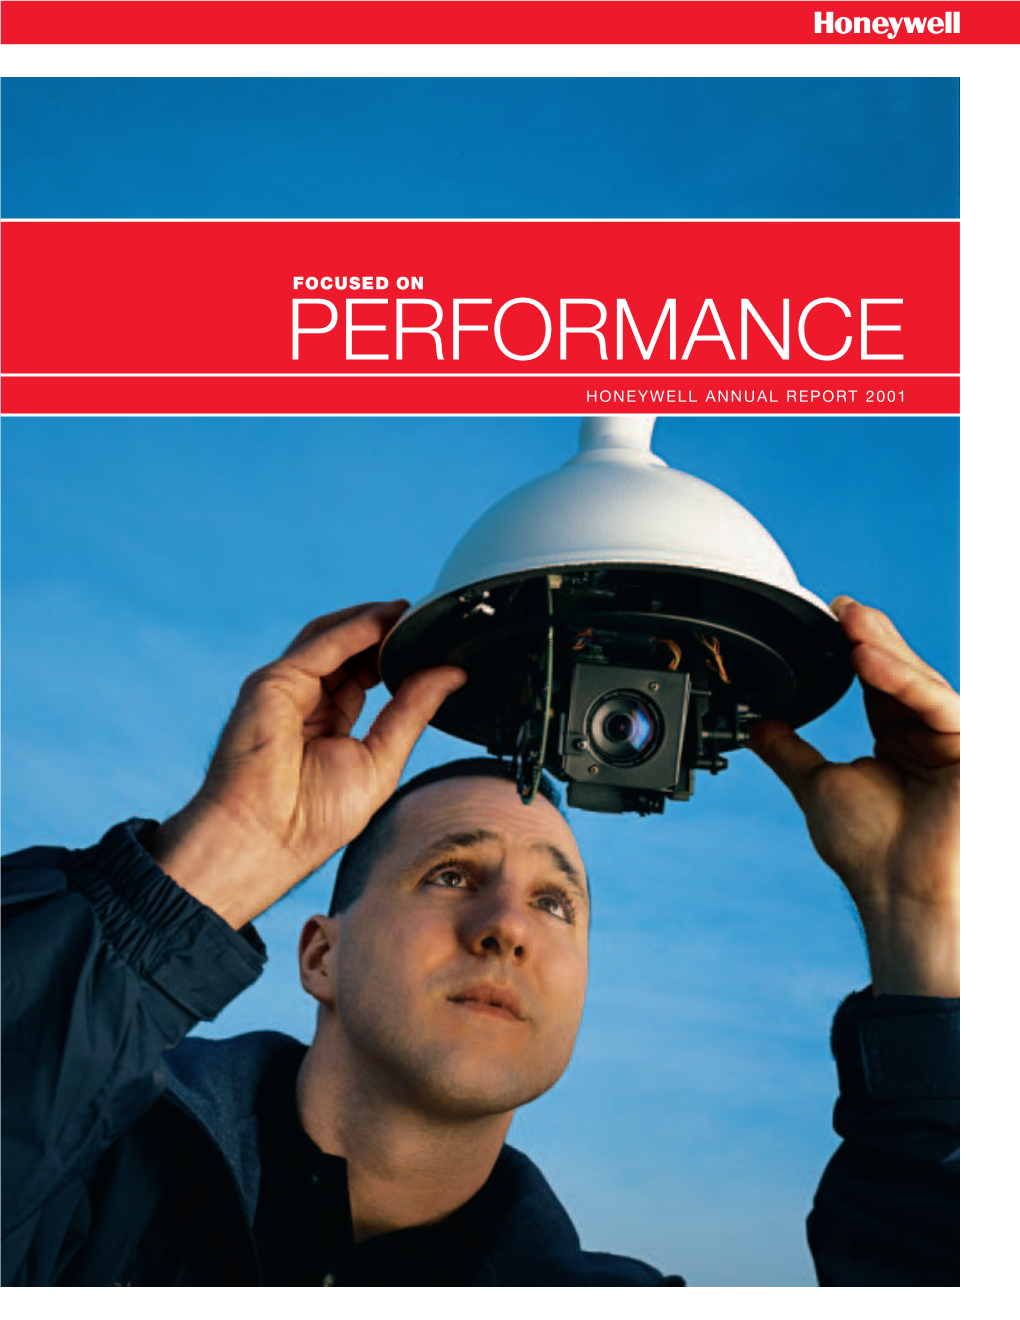 Performance Honeywell Annual Report 2001 Table of Contents